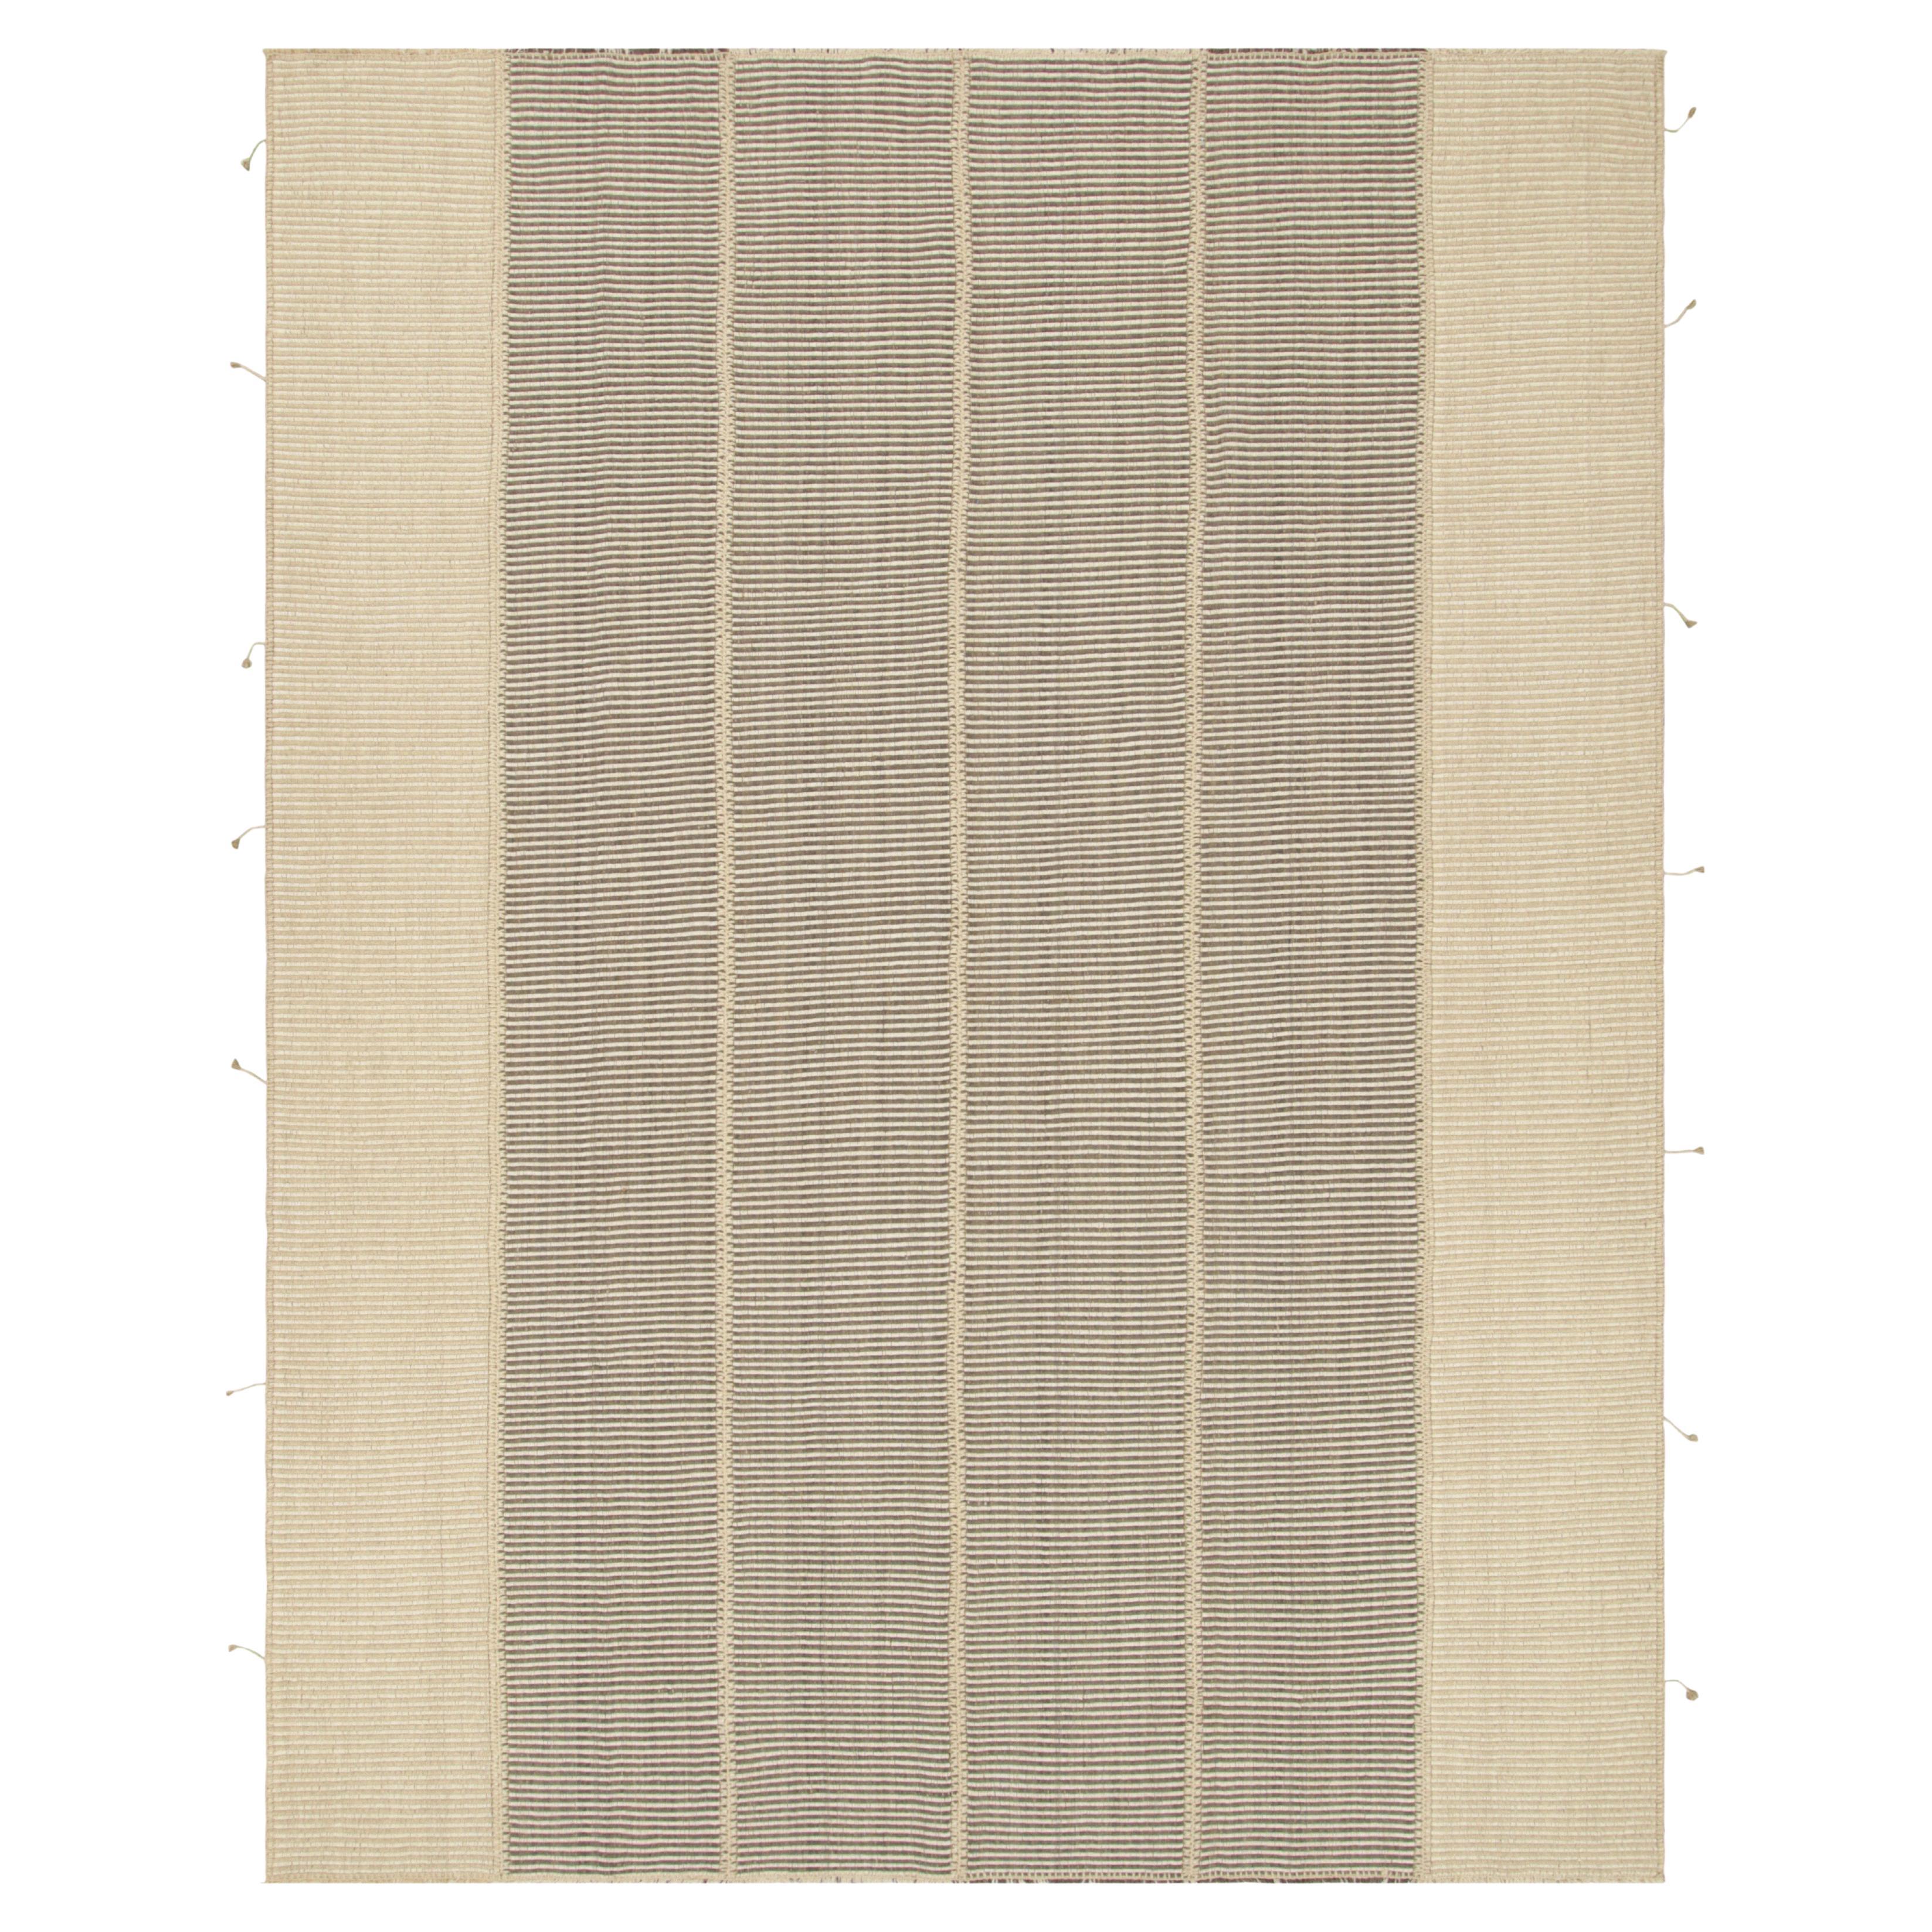 Rug & Kilim’s Contemporary Kilim in Black and Beige Textural Stripes For Sale